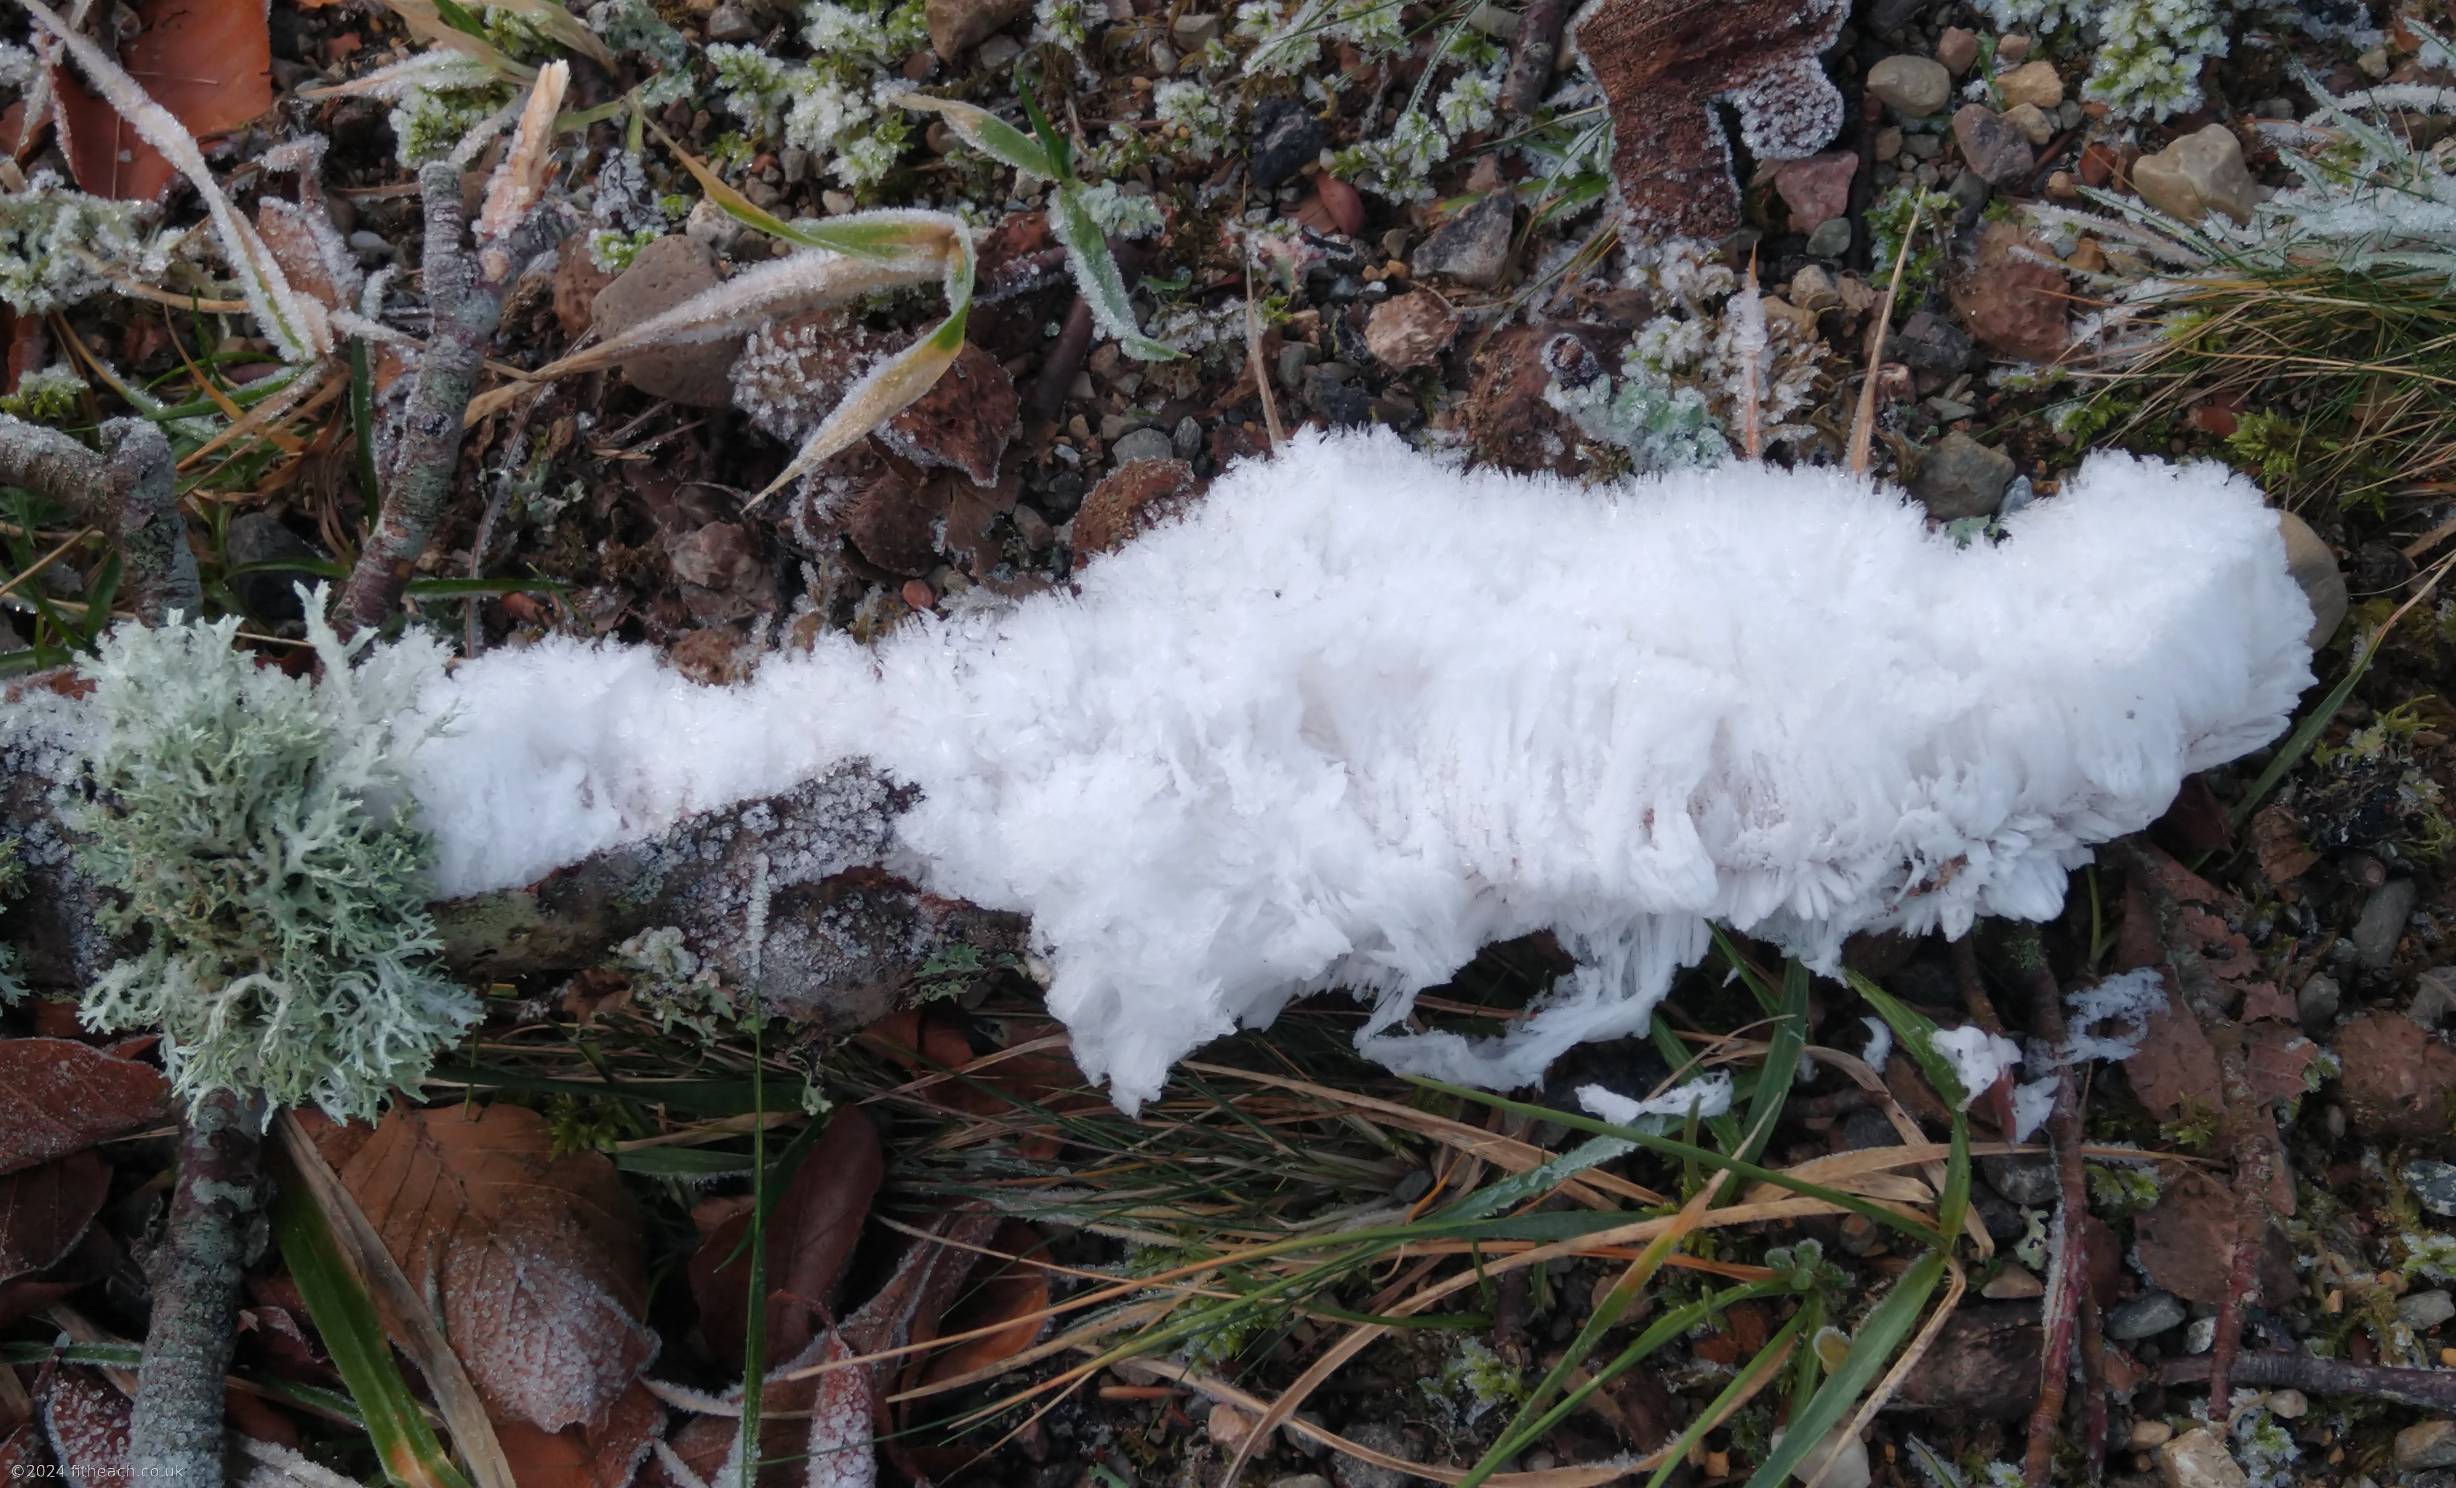 A small beech branch, lying on the ground. Emanating along the length of the branch is the white hair ice.